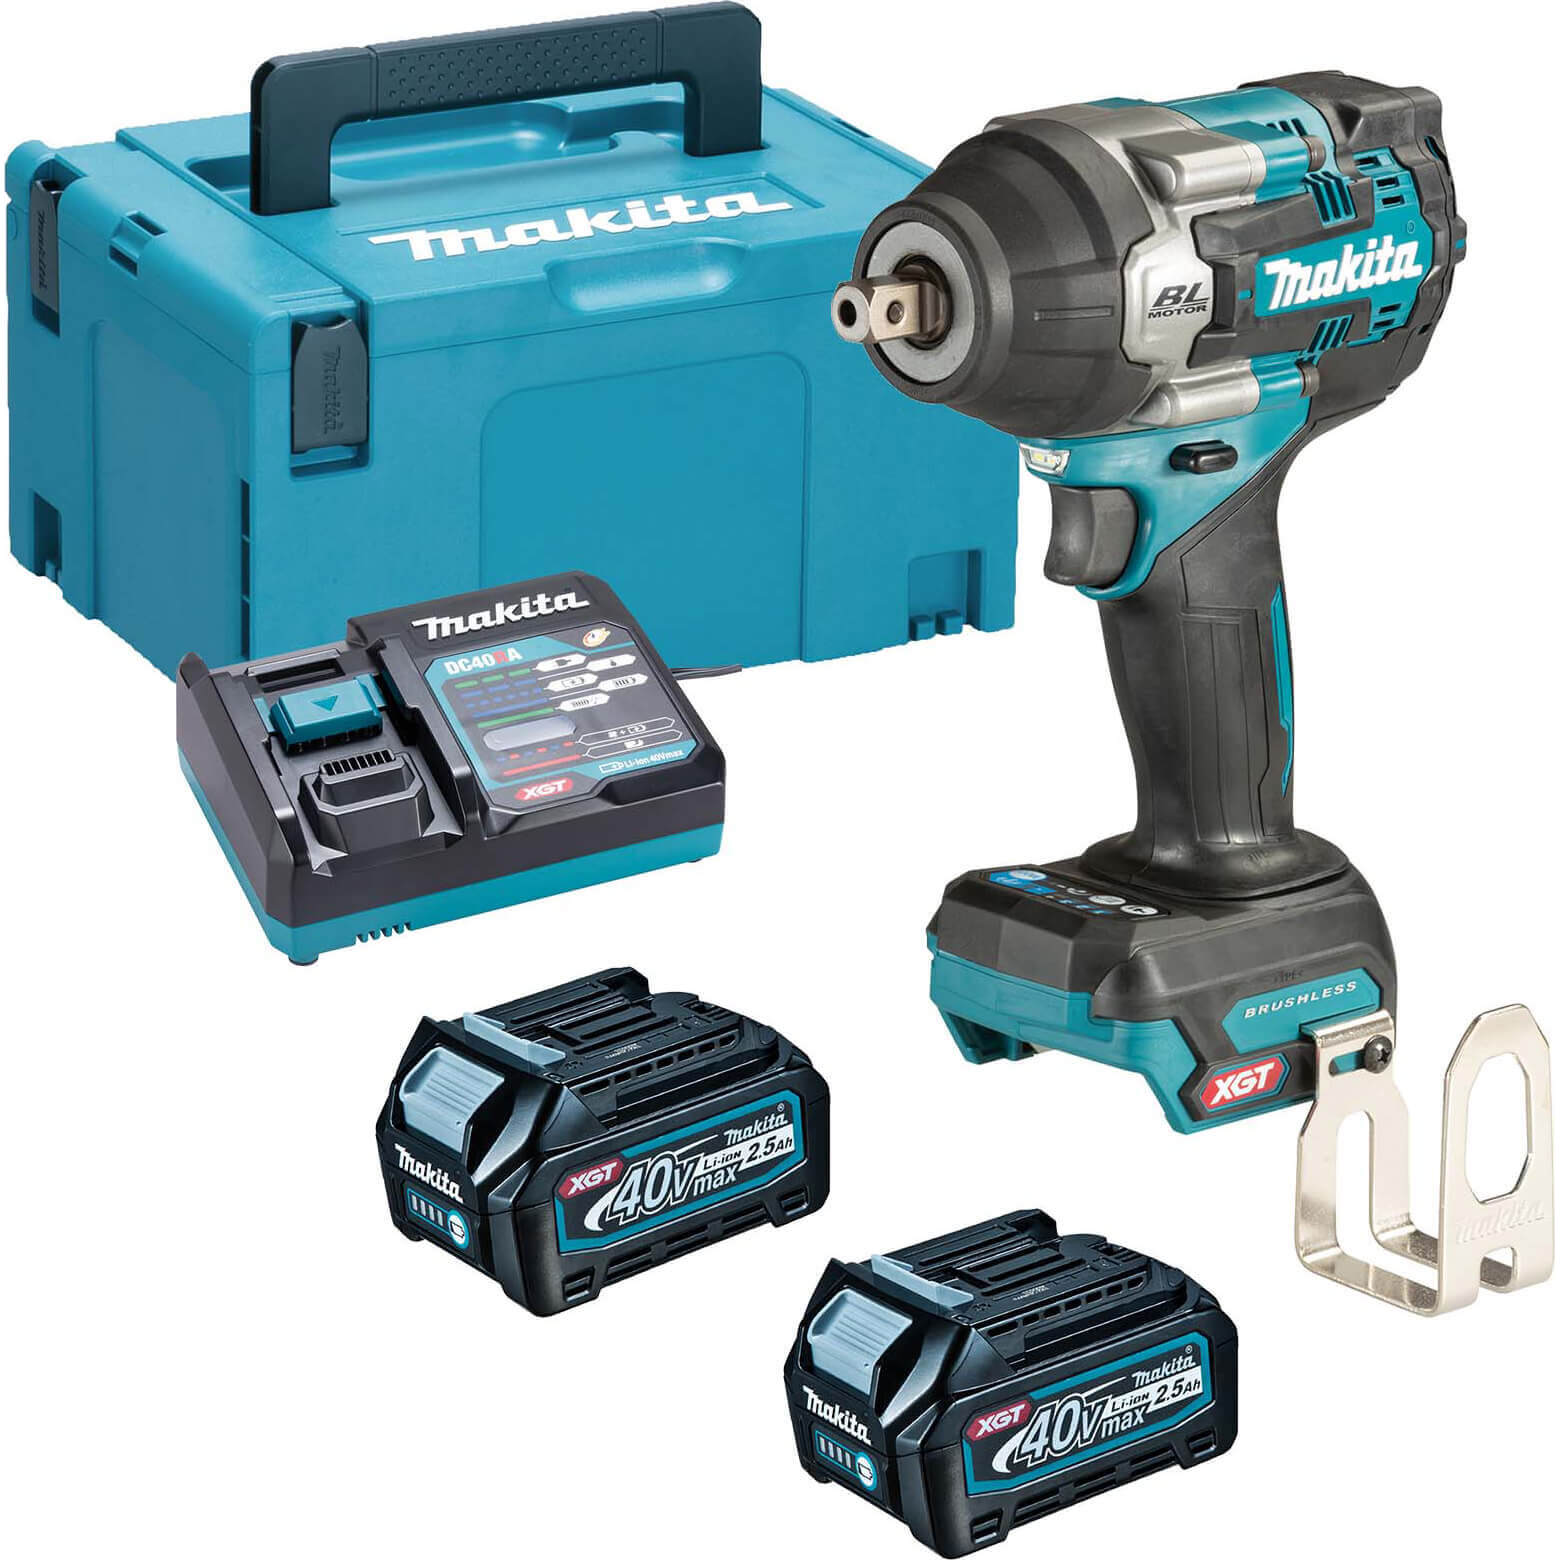 Image of Makita TW008G 40v Max XGT Cordless Brushless 1/2" Drive Impact Wrench 2 x 2.5ah Li-ion Charger Case